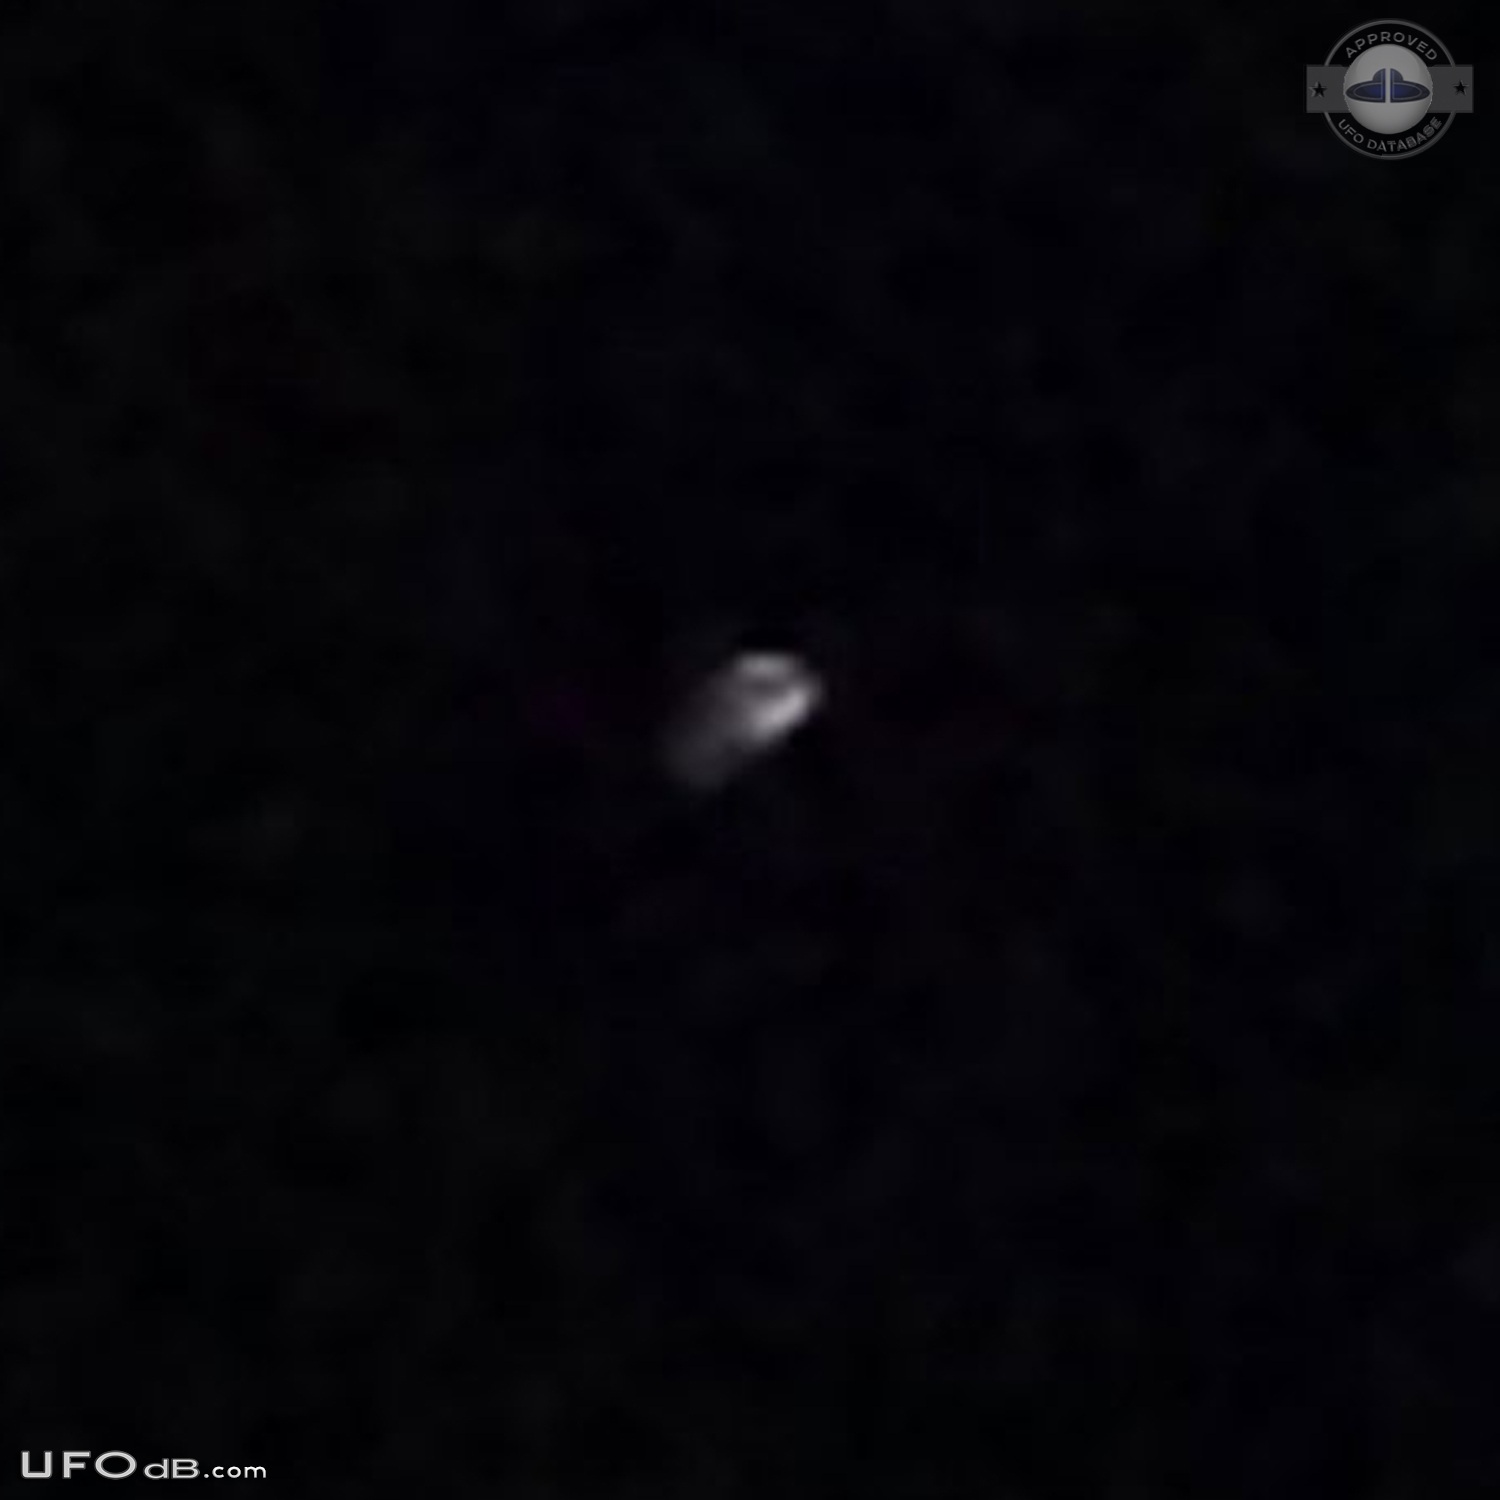 UFO with tentacles with reddish color seen over Magee, Mississipi 2014 UFO Picture #561-4